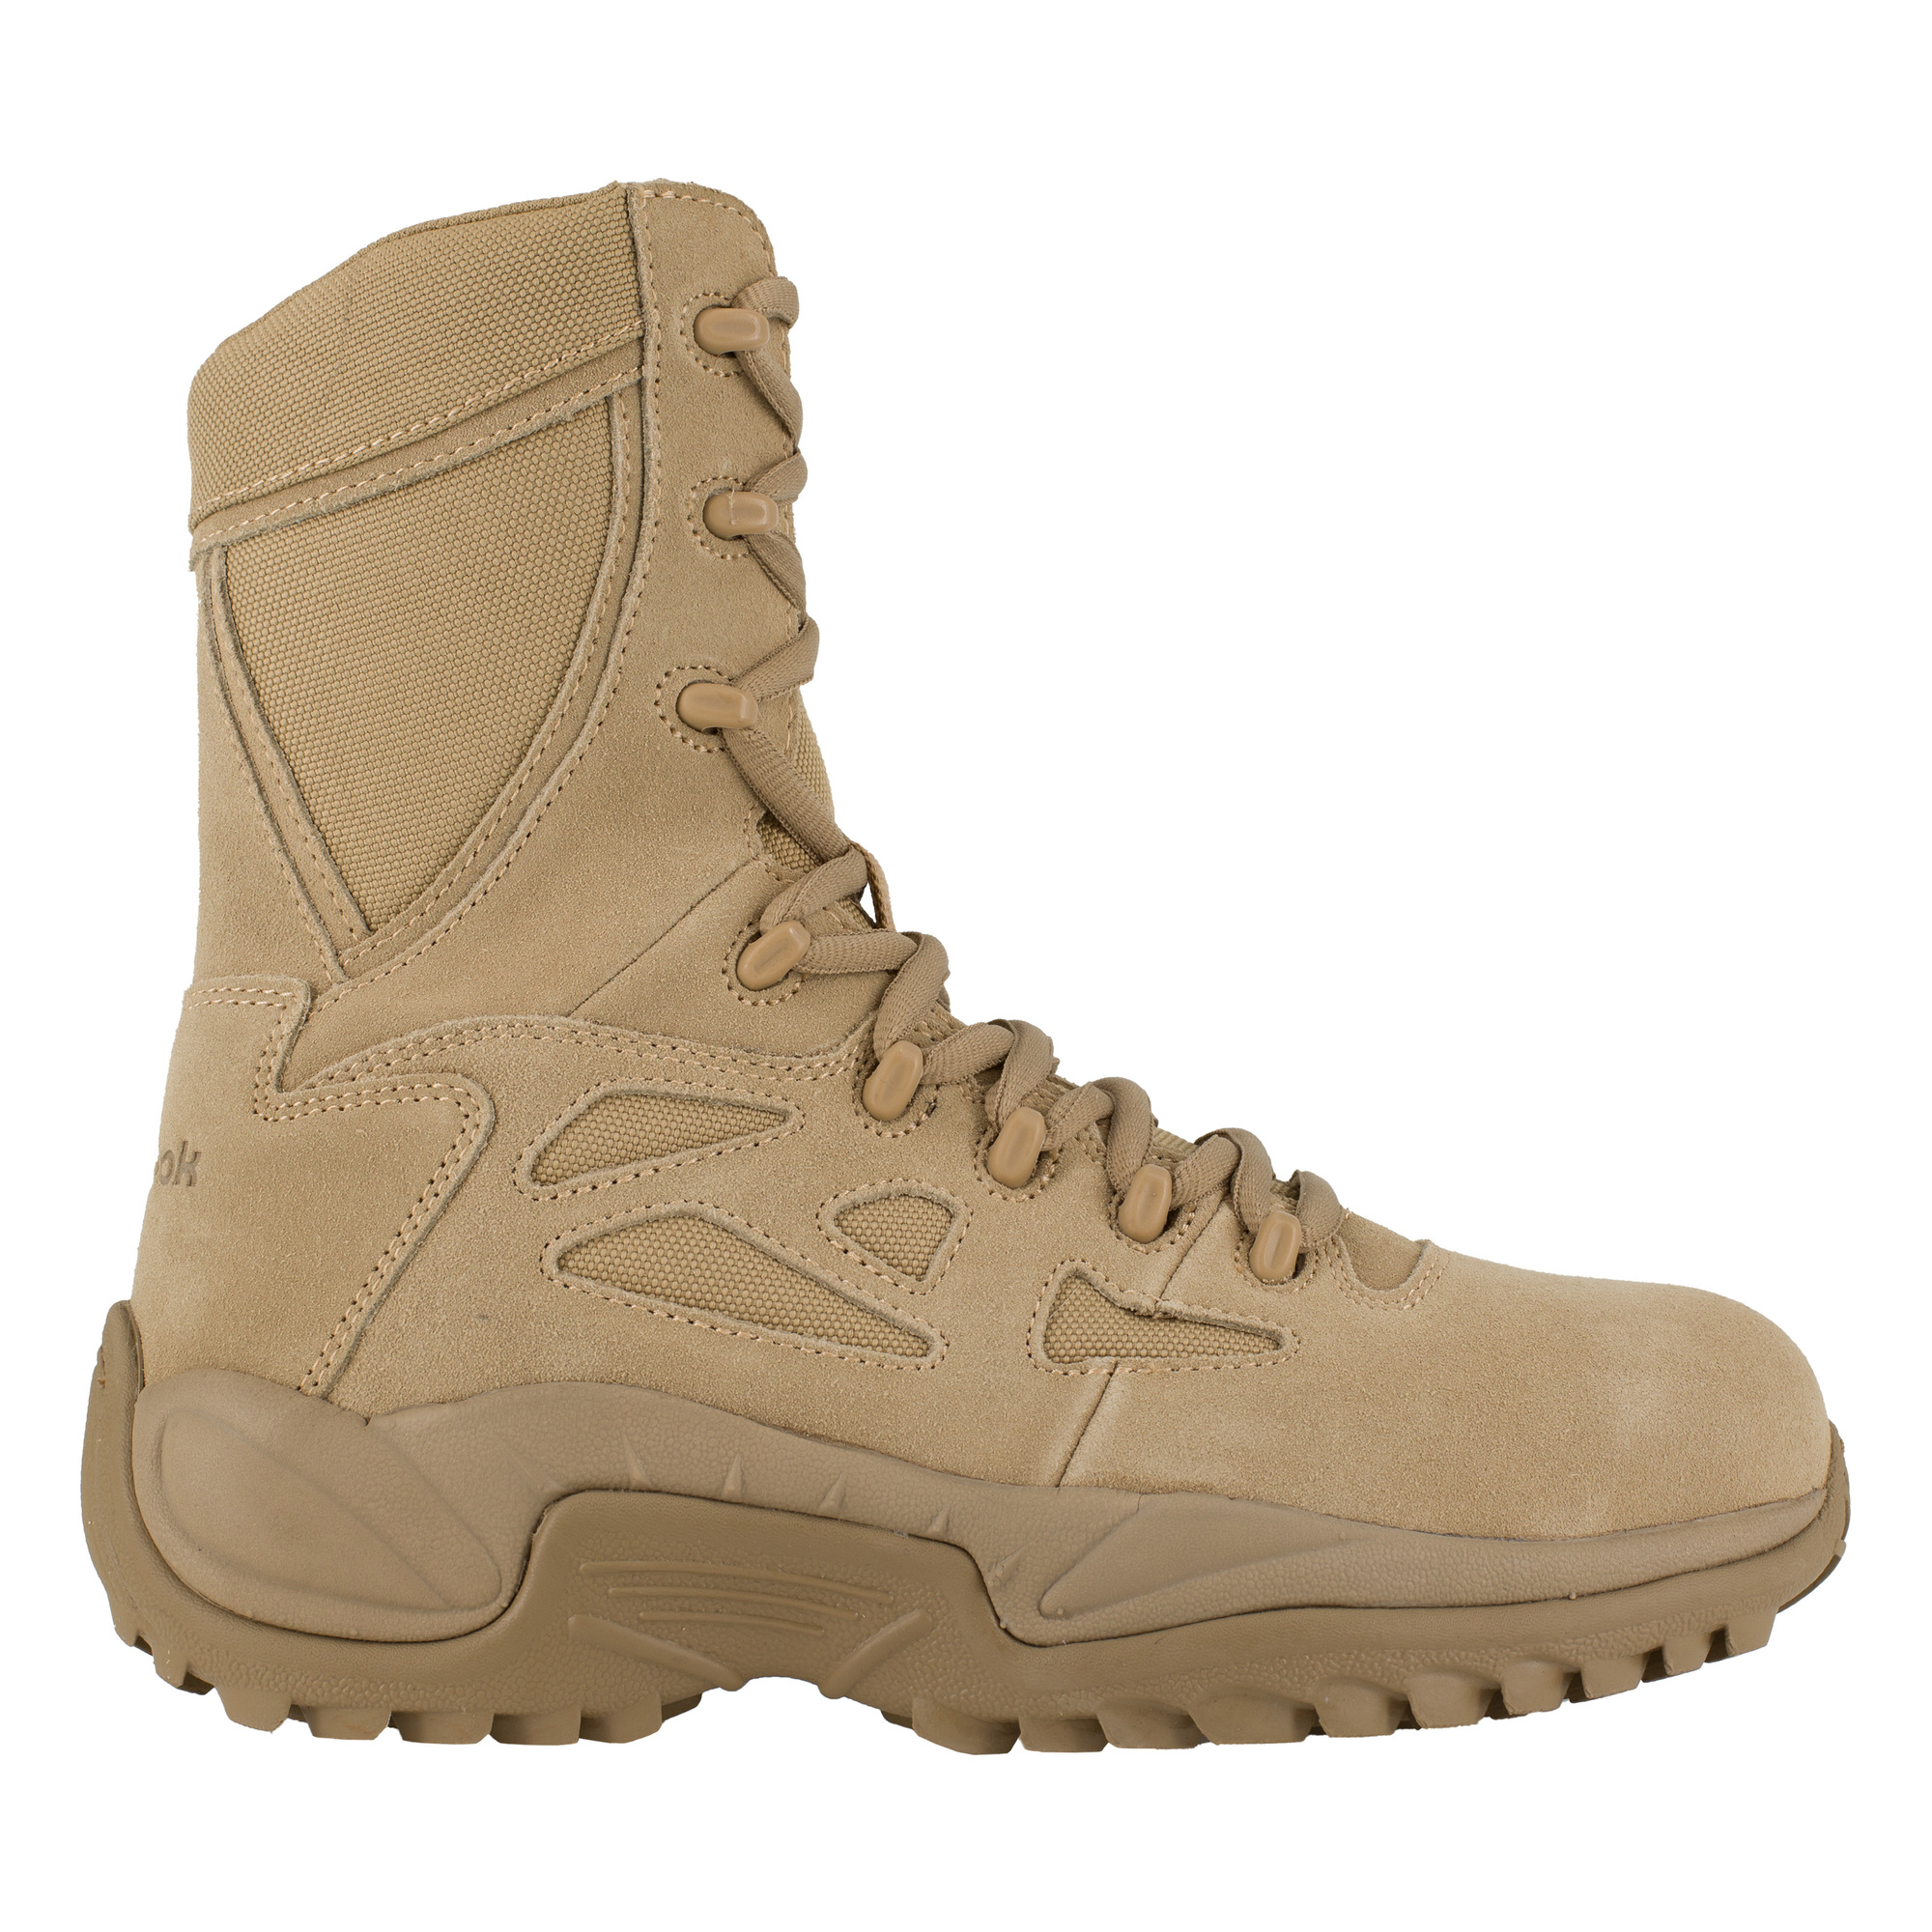 Reebok, 8Inch Stealth Tactical Boot with Side Zipper, Size 8 1/2, Width Wide, Color Desert Tan, Model RB894 -  RB894-W-08.5